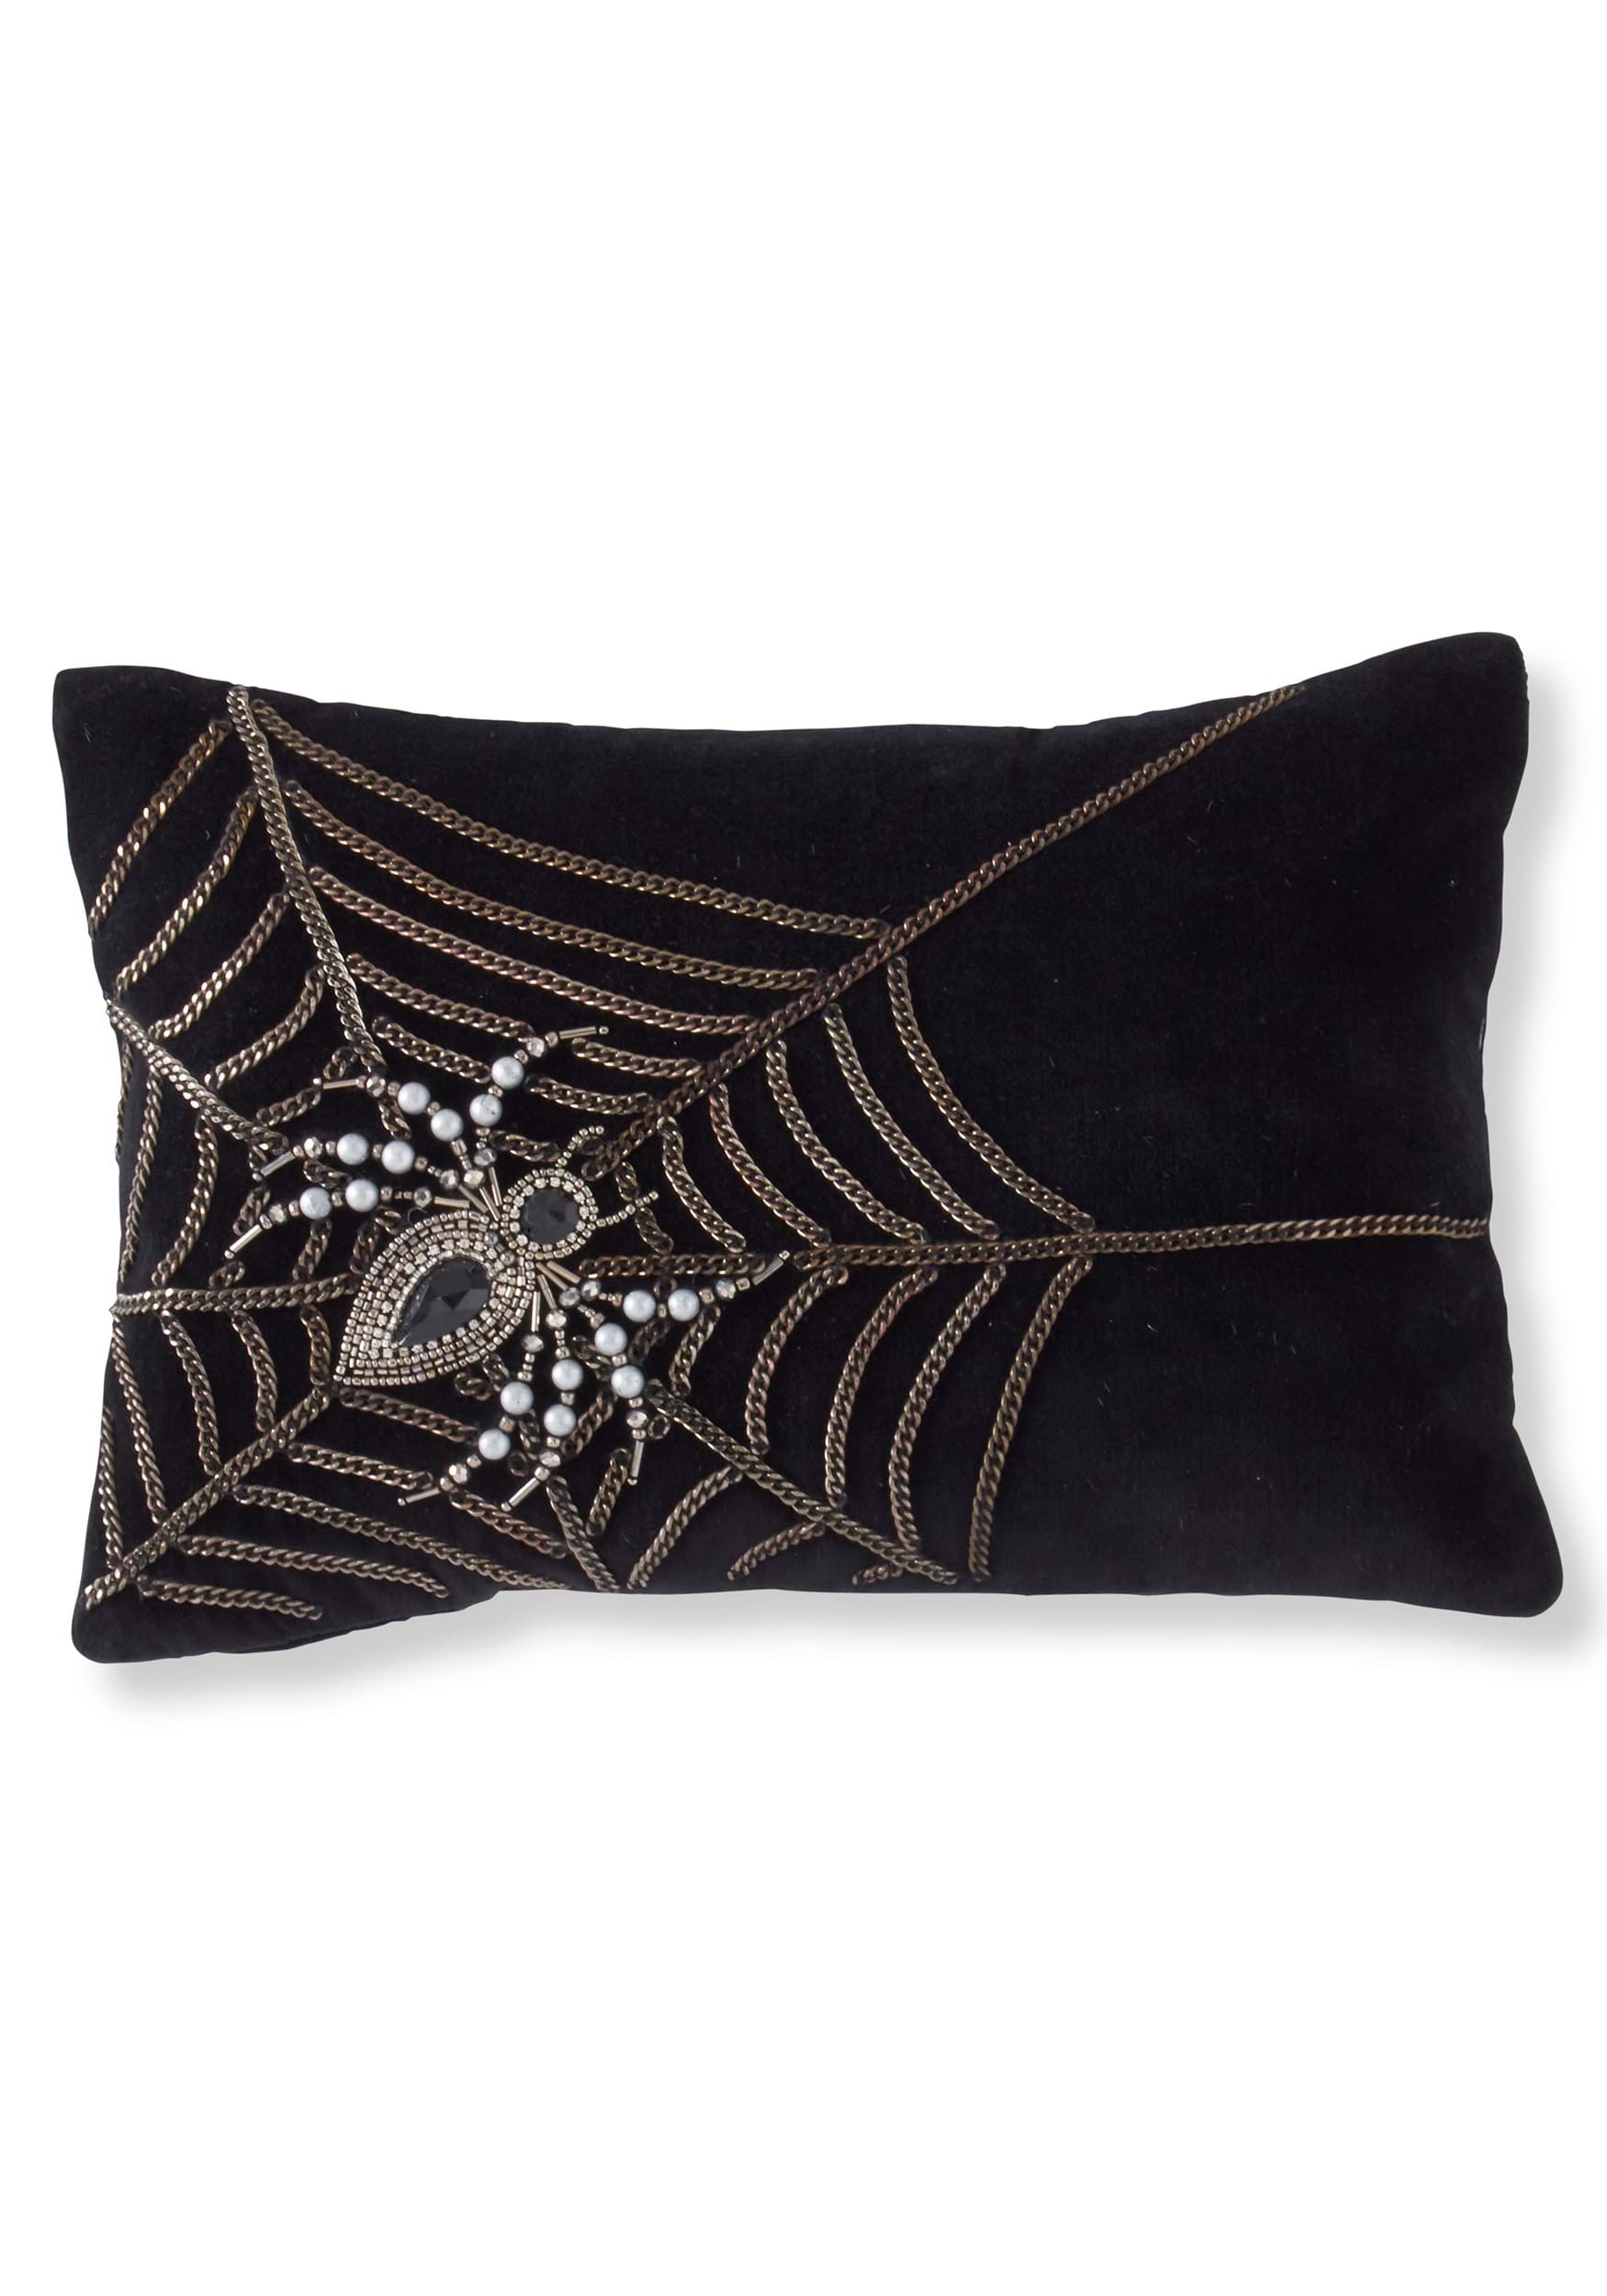 14 Black Velvet Pillow With Chain Web And Beaded Spider